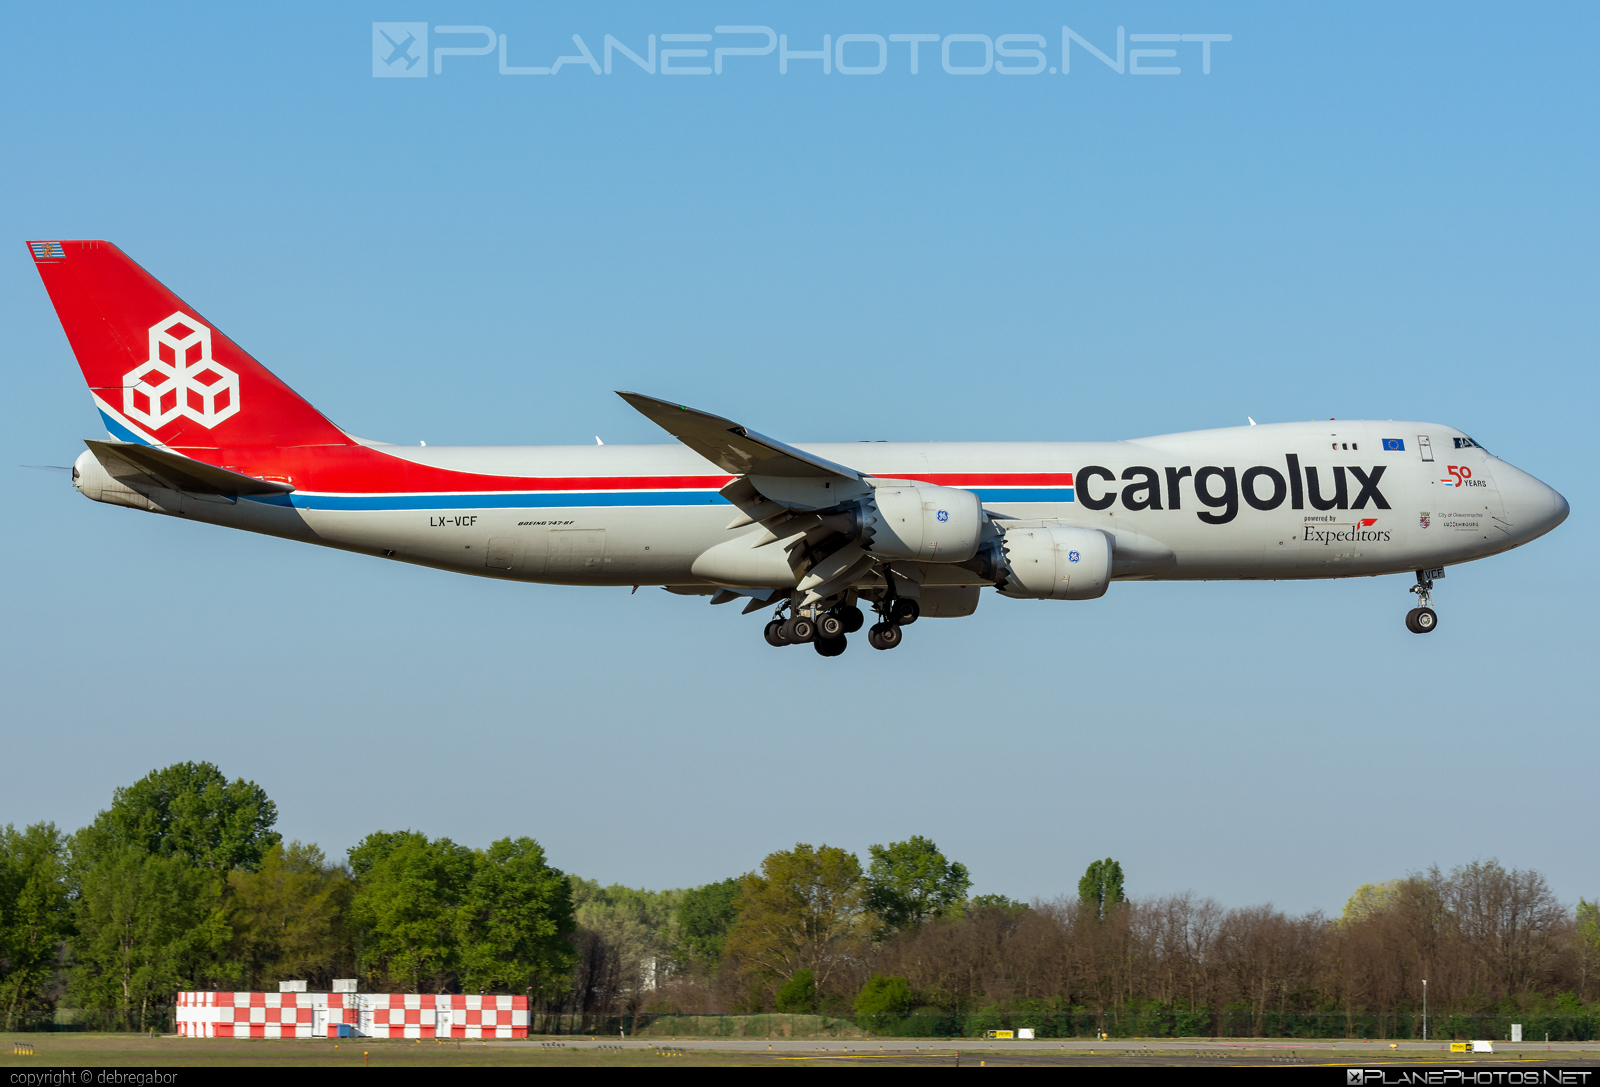 Boeing 747-8F - LX-VCF operated by Cargolux Airlines International #b747 #b747f #b747freighter #boeing #boeing747 #cargolux #jumbo